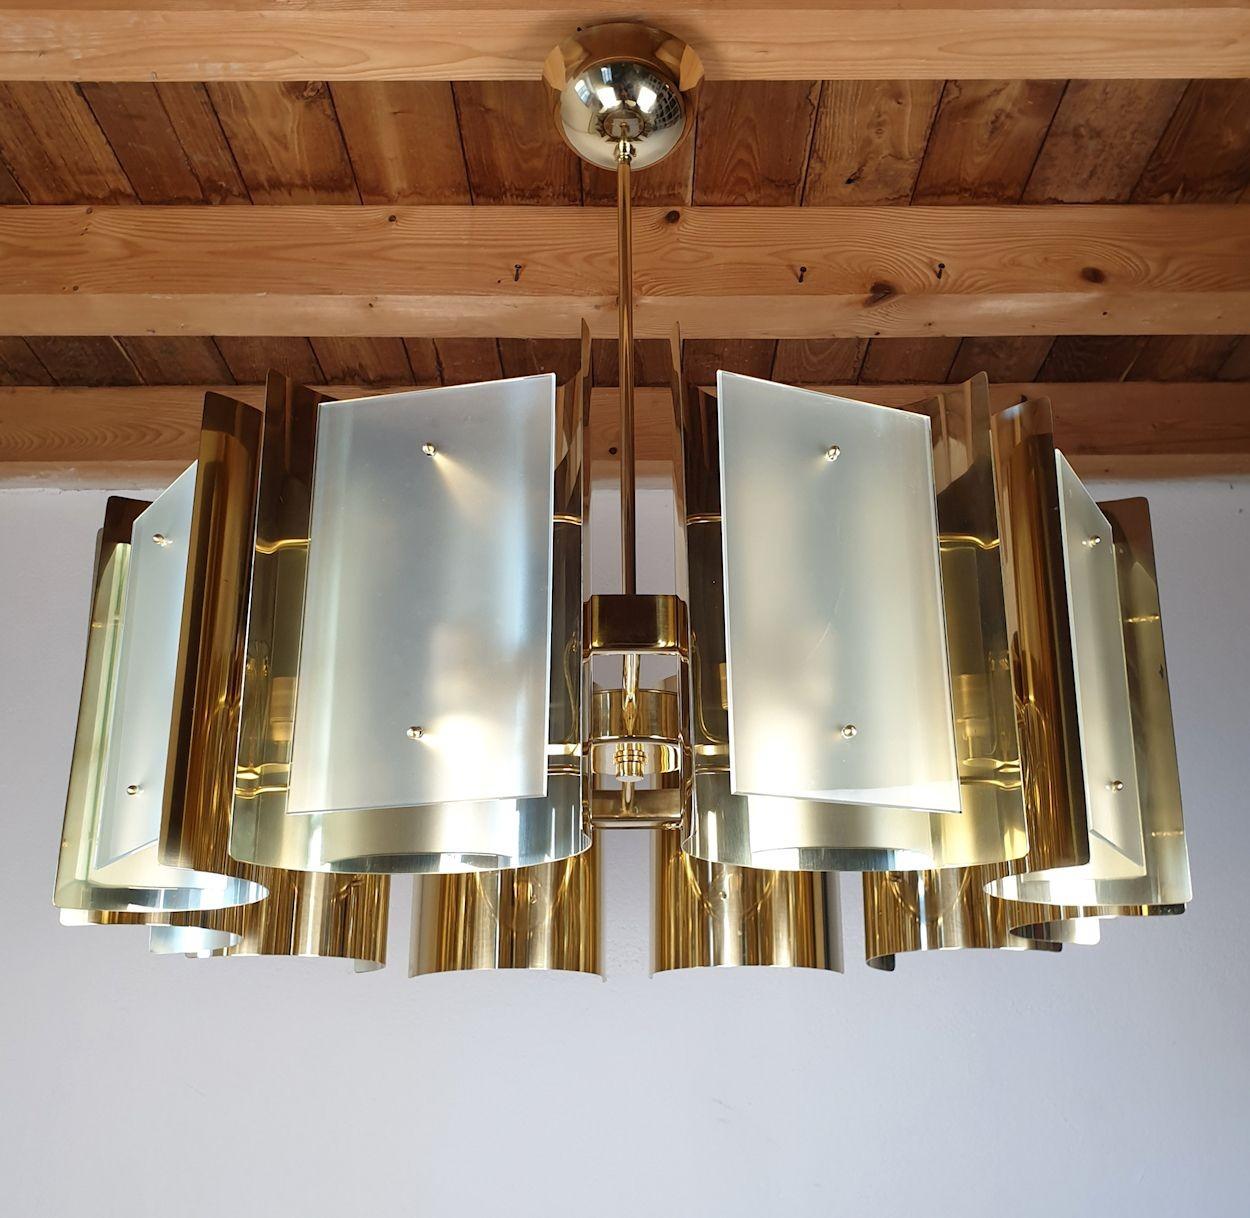 Large Mid Century Modern round brass chandelier, attributed to Sciolari Italy 1970s.
The vintage chandelier is made of ten curved polished brass elements and frosted glasses, each nesting one light.
The Brass chandelier has 10 lights and is